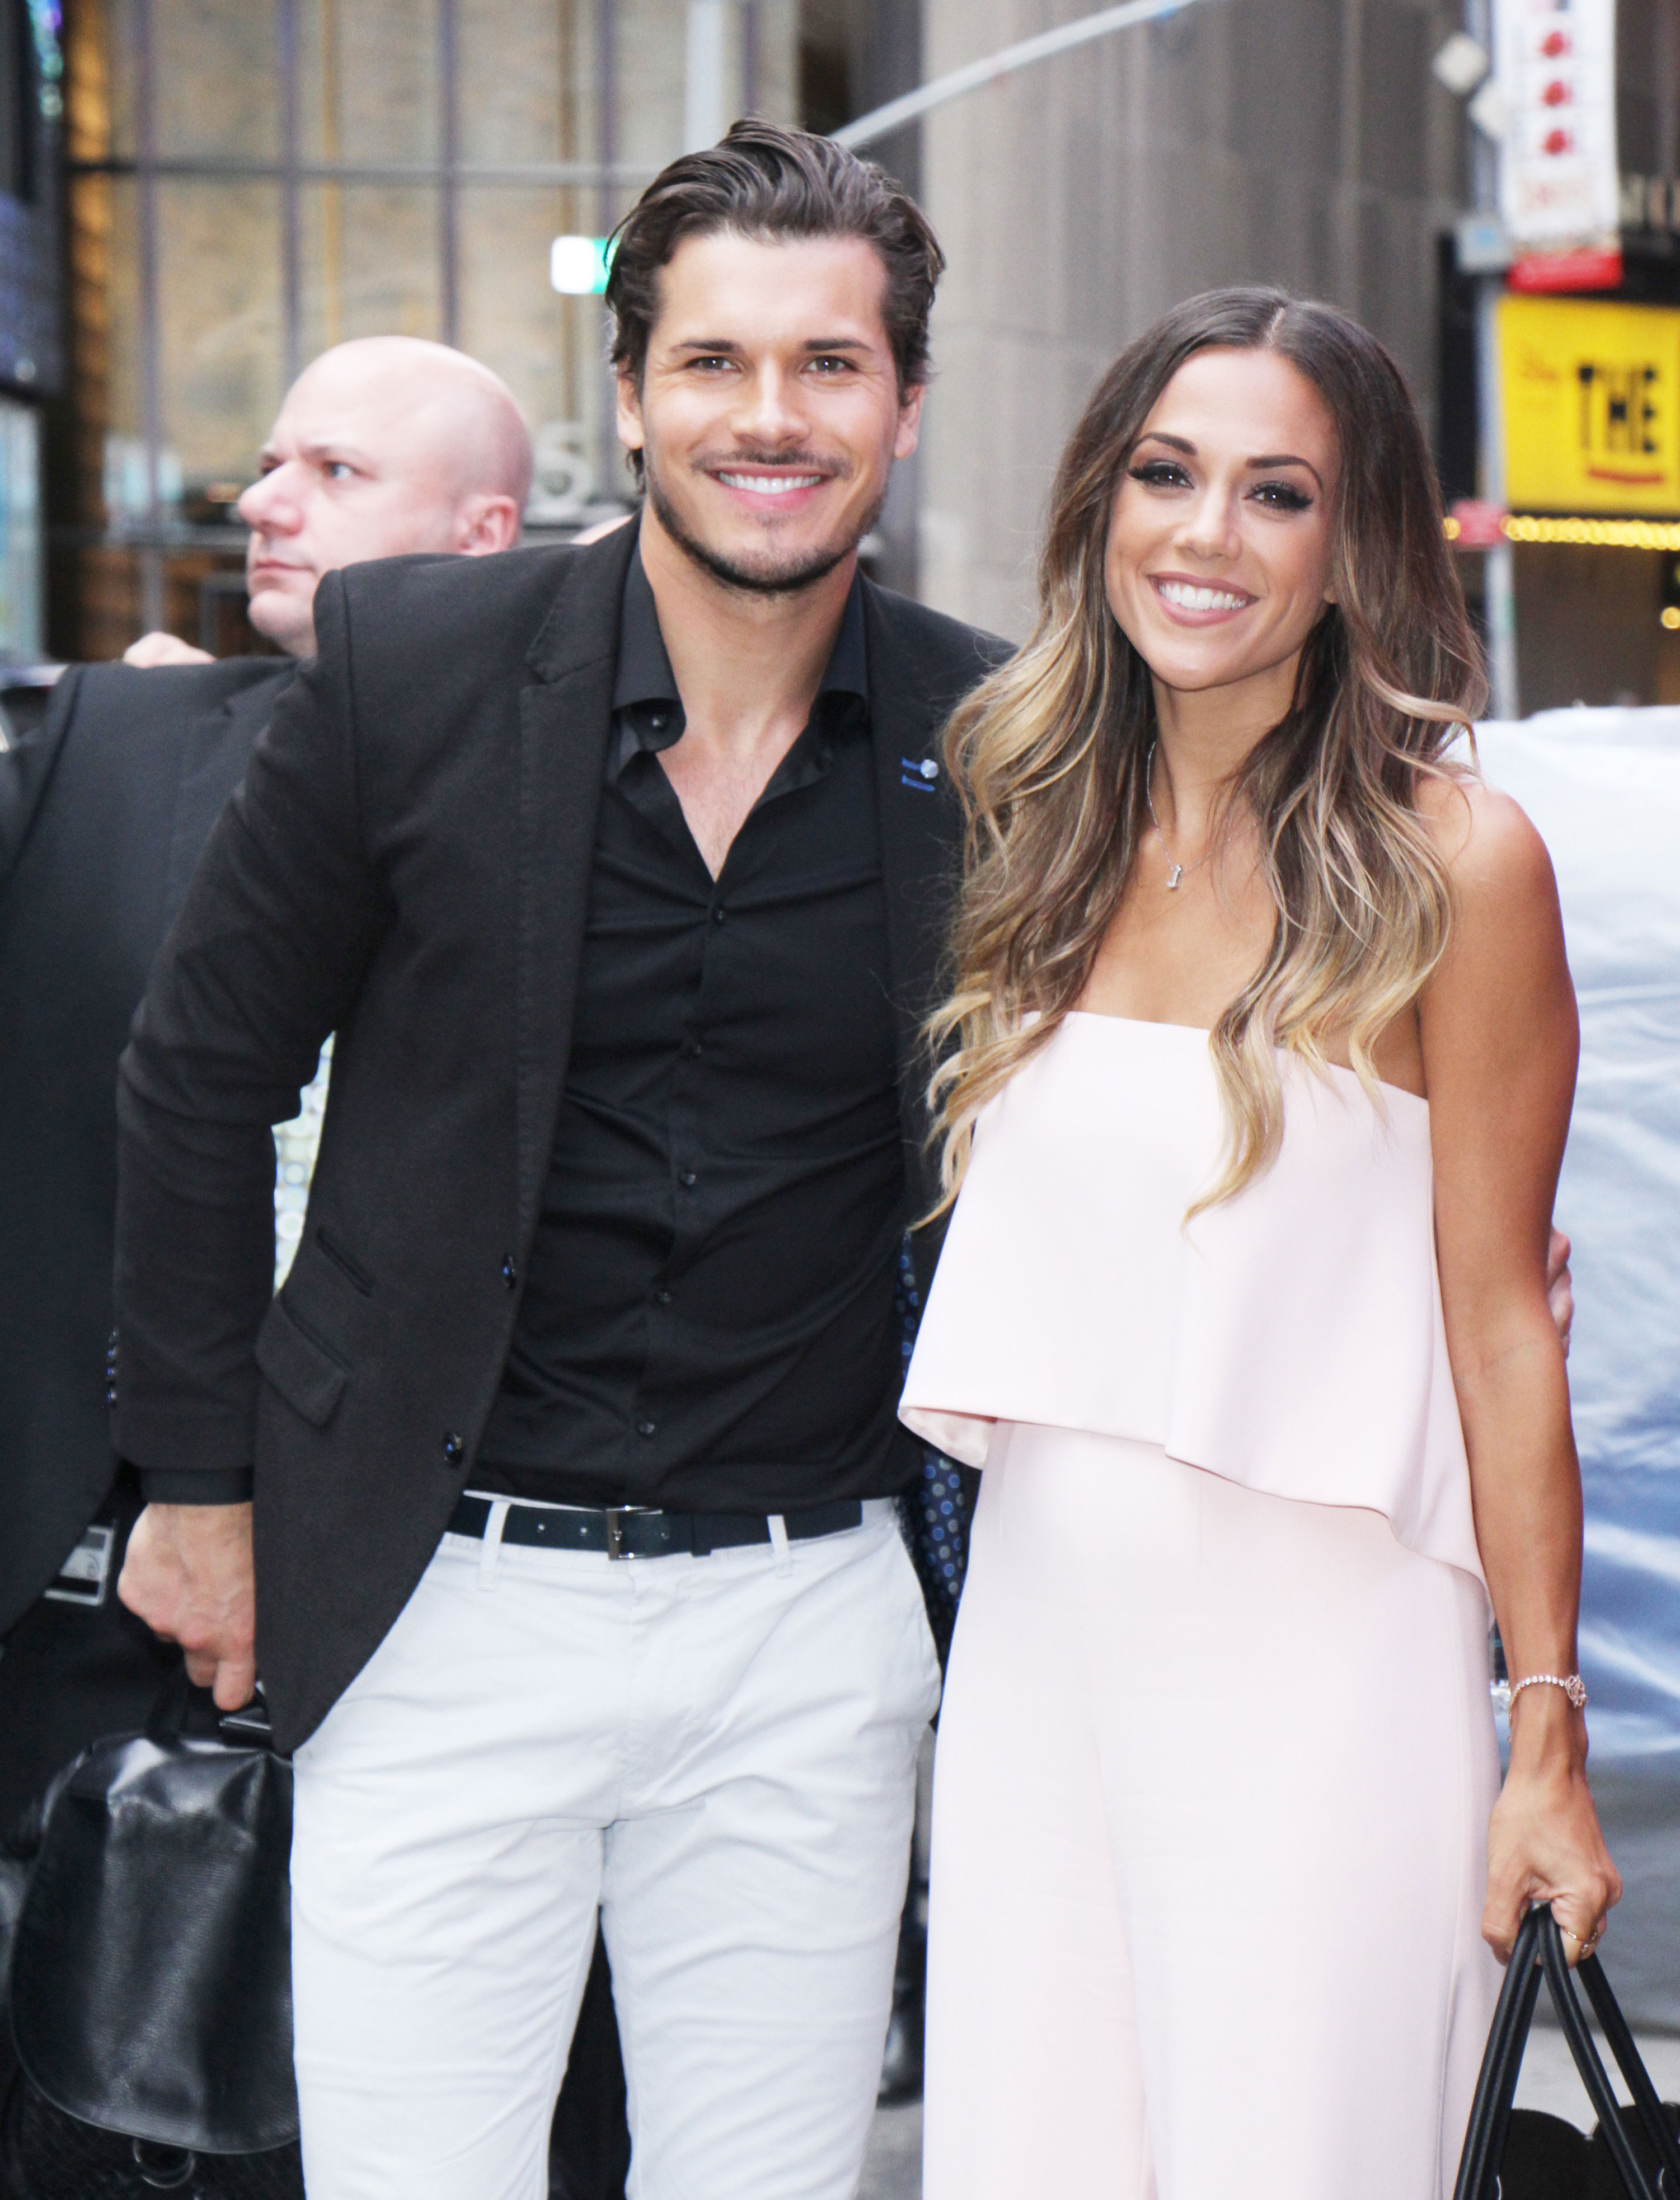 <p>In late May 2022, Jana Kramer's ex Ian Schinelli, a former Navy SEAL who was <a href="https://www.wonderwall.com/celebrity/couples/one-tree-hill-alum-dating-hunky-former-navy-seal-less-than-a-year-after-cheating-scandal-derailed-marriage-plus-more-celeb-love-news-545984.gallery?photoId=546626">her first boyfriend</a> following <a href="https://www.wonderwall.com/celebrity/couples/one-tree-hill-star-reportedly-caught-husband-cheating-again-plus-more-celeb-love-news-448311.gallery?photoId=366338">her spring 2021 split</a> from unfaithful third husband Mike Caussin (more on Mike in a minute), entered into <a href="https://www.wonderwall.com/celebrity/couples/jana-kramer-accused-of-multiple-affairs-manipulating-romantic-partners-and-more-in-series-of-bombshell-allegations-603380.gallery">a bombshell-filled he said, she said debate</a> with the "One Tree Hill" alum -- much of it concerning alleged cheating -- in the wake of their spring 2022 breakup after she talked about it on her podcast. <a href="https://www.usmagazine.com/celebrity-news/news/jana-kramer-gleb-savchenko-hooked-up-on-dancing-with-the-stars/">Us Weekly</a> reported that, according to multiple sources, Jana hooked up with her partner, Gleb Savchenko (pictured), on season 23 of "Dancing With the Stars" in 2016. At the time, she was separated from her third husband, Mike Caussin, but Gleb was still married to Elena Samodanova, from whom he <a href="https://www.wonderwall.com/celebrity/couples/chrishell-stause-accused-of-cheating-with-married-dwts-partner-gleb-savchenko-more-celeb-love-news-romance-report-400809.gallery?photoId=400903">split in 2020</a>. "Jana has admitted to me that she slept with two guys while Mike was in rehab [for <a href="https://www.wonderwall.com/news/jana-kramer-mike-caussin-reveal-he-had-massive-sex-addiction-relapse-3018952.article">sex addiction</a>]. She slept with Gleb. She justified it saying, 'We were <a href="https://www.wonderwall.com/celebrity/couples/tk-plus-more-celeb-love-news-381784.gallery?photoId=366338">legally separated</a>,'" Ian told Us. (On June 6, Gleb told <a href="https://www.etonline.com/dwts-gleb-savchenko-shuts-down-jana-kramer-affair-rumors-exclusive-185196">"Entertainment Tonight"</a> it was "absolutely not" true that he and Jana had an affair before, during or after their "DWTS" partnership: "Have we ever had anything? Absolutely not. Absolutely not.") Ian also told the magazine that Jana has "been with two co-stars where she tried to get them to leave their wives" for her, claiming she admitted to him that she had feelings for her "The Holiday Fix Up" co-star Ryan McPartlin and wanted him "to choose" her over his wife, Danielle Kirlin. "For the first three weeks of dating her, she had a picture of [Ryan] in the bathroom — a signed picture," Ian said. Jana told <a href="https://www.usmagazine.com/celebrity-news/news/jana-kramer-accuses-ex-ian-schinelli-of-cheating-he-responds/">Us Weekly</a> that she broke up with Ian because he "lied about cheating on his ex-wife" and claimed she also "found out from many women I was not the only one during our relationship." Ian, however, insisted that Jana "was the only one during our relationship," which lasted about six months.</p>